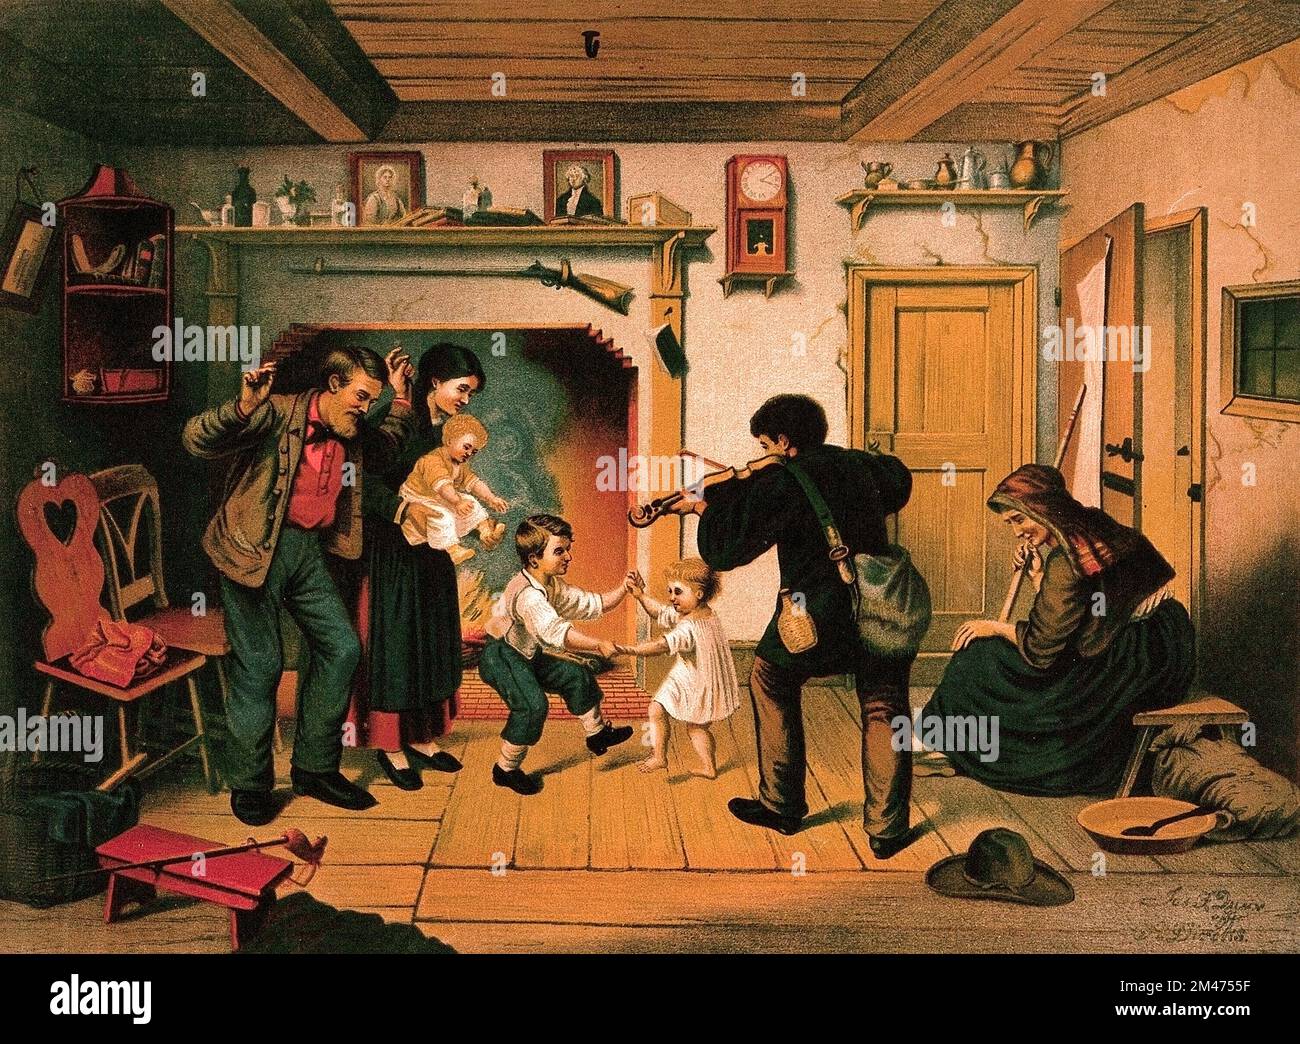 A young black man playing the violin for a white family in their house: a man, his wife and their two children are dancing by the fireplace while an old lady is seated on a bench. Colour lithograph by Jas. F. Queen, 1877, Stock Photo